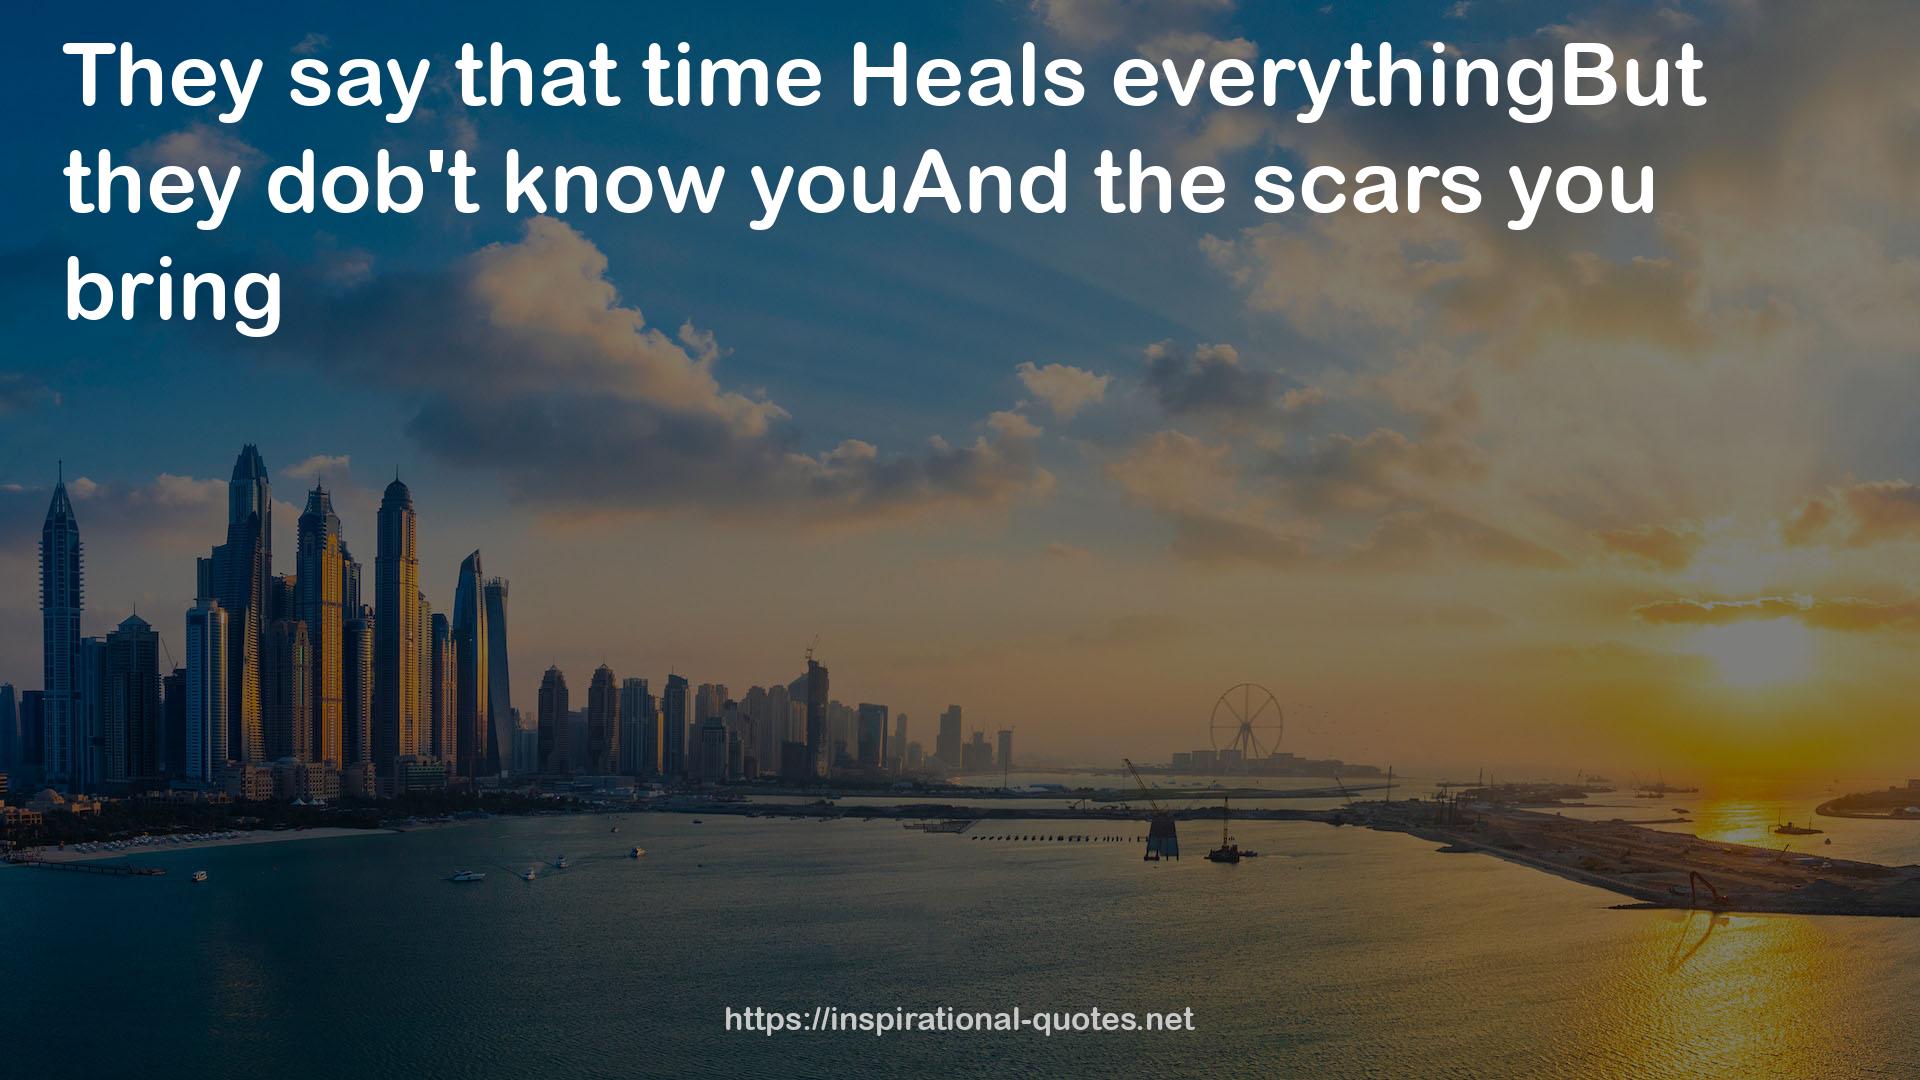 youAnd the scars  QUOTES